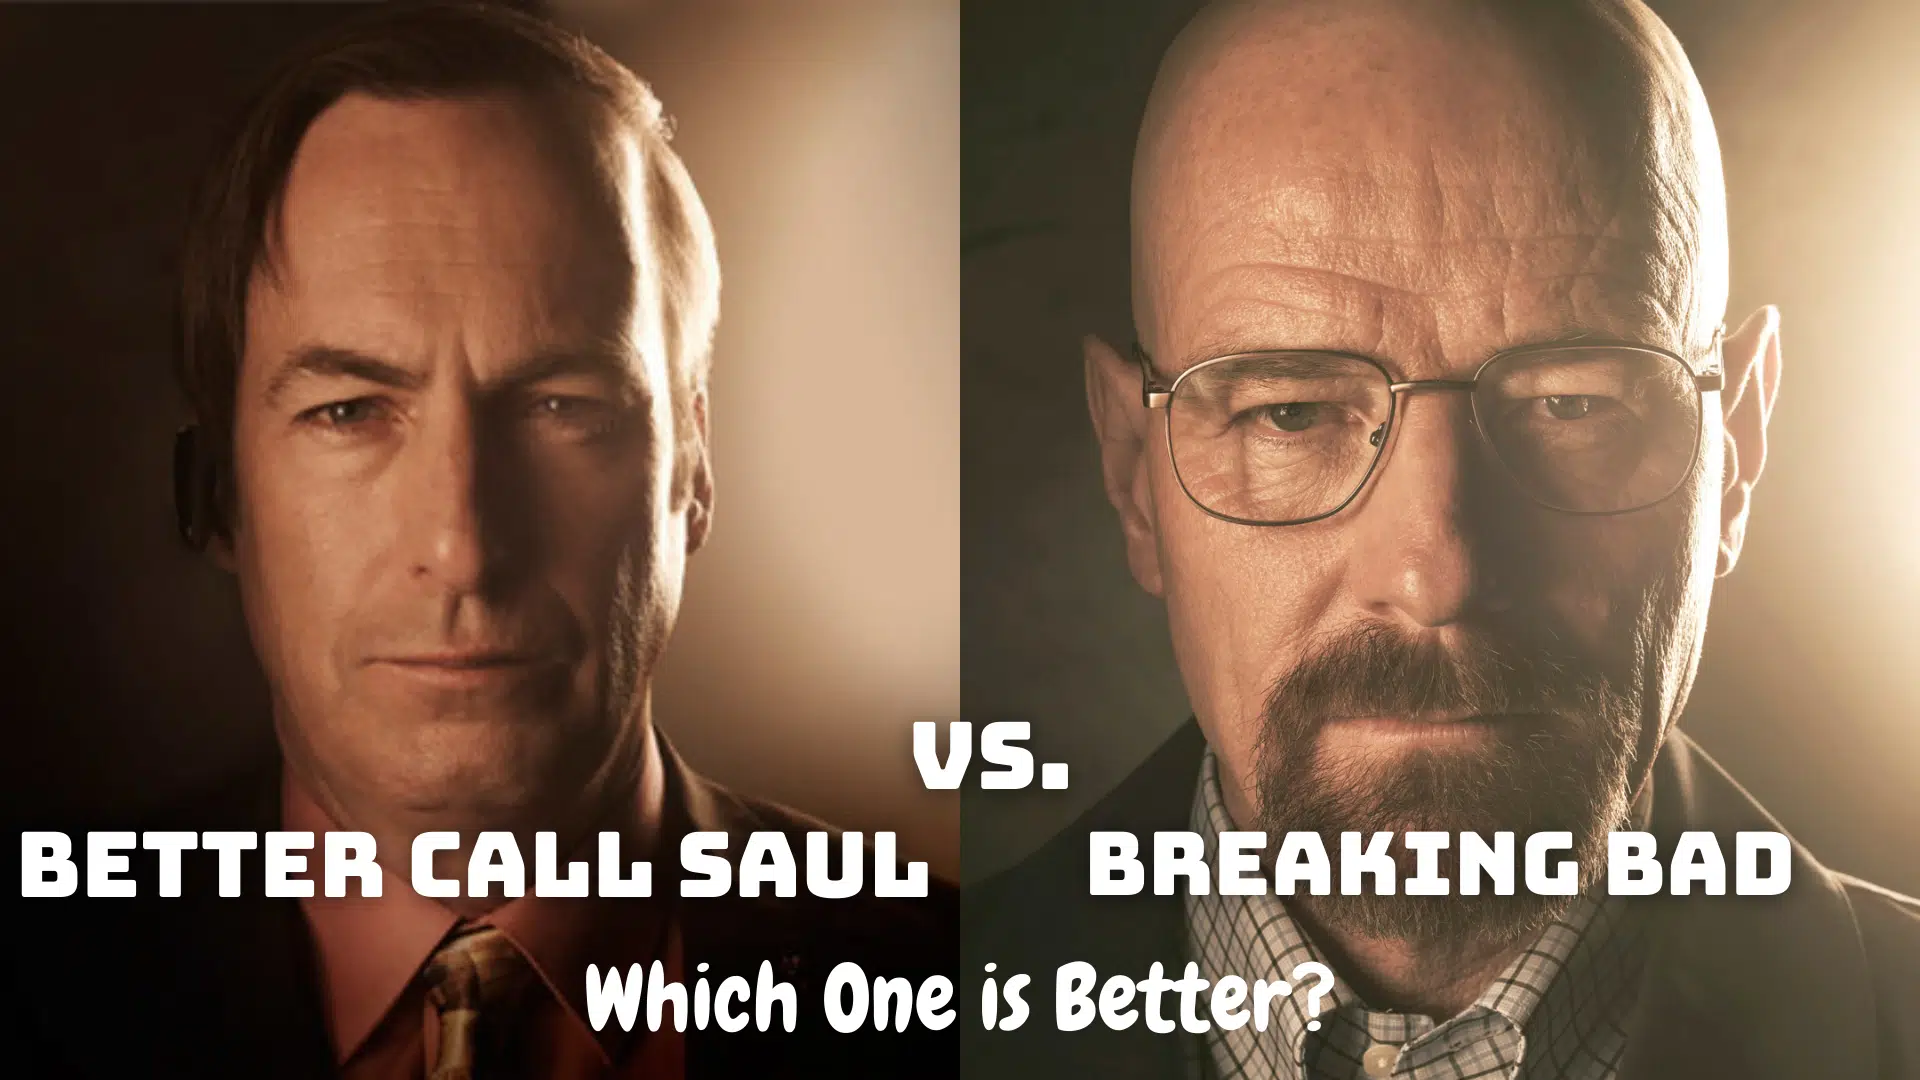 Which One is Better: Better Call Saul vs. Breaking Bad